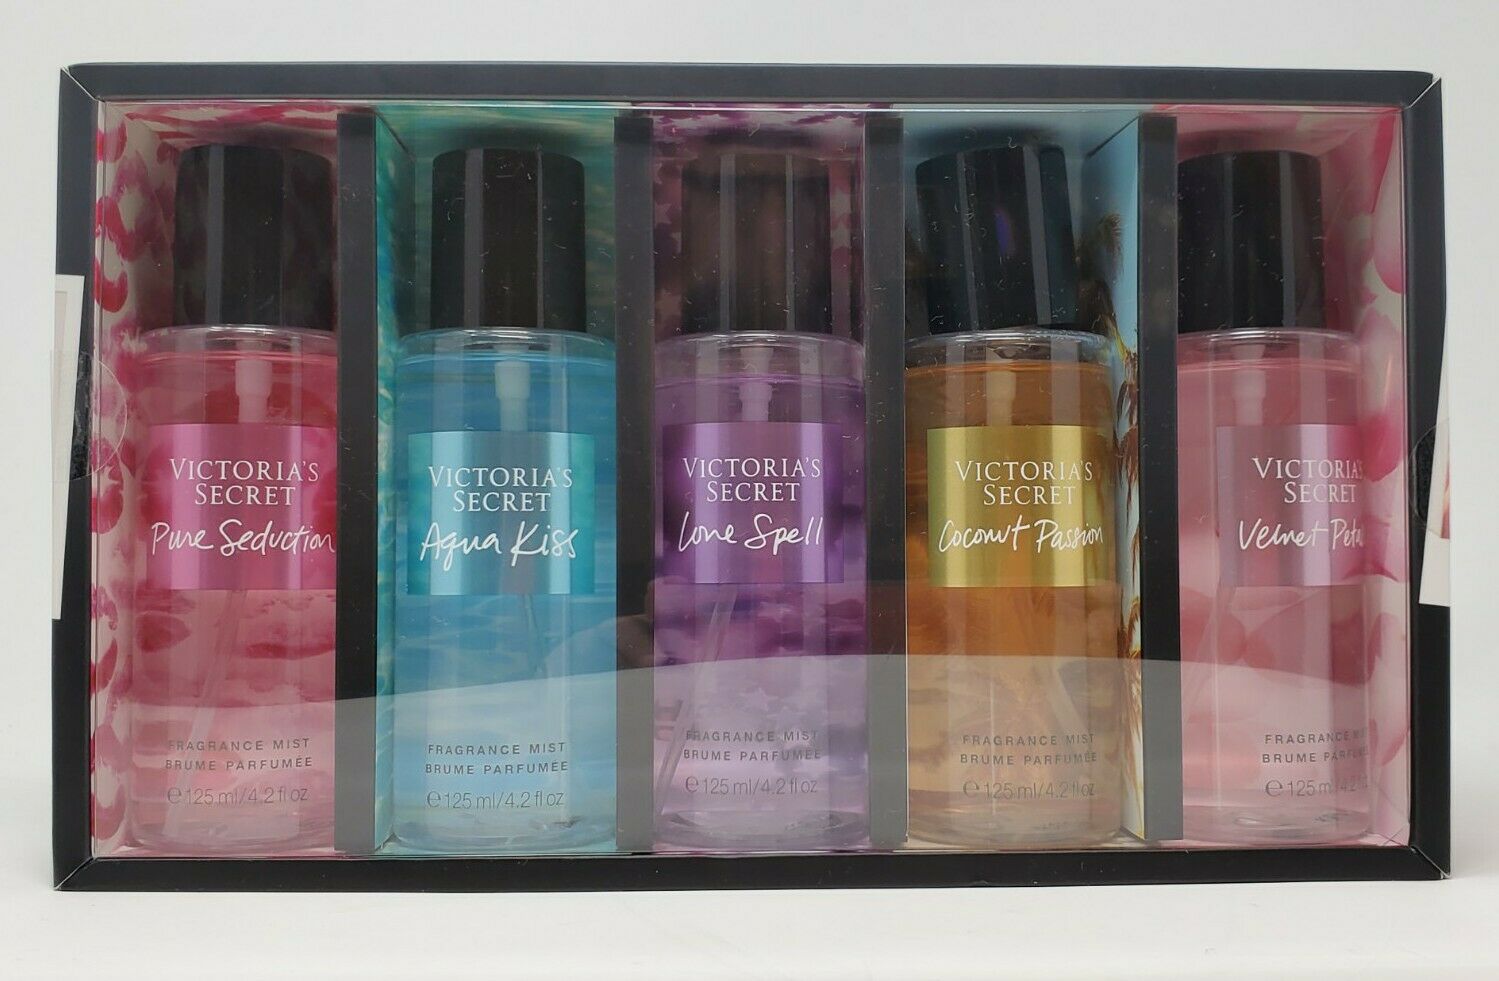 Fruit groente dynastie Dokter Victoria's Secret Assorted Body Mists 5 pc 4.2 oz. Bottles Gift Set NI –  Think Pink And More